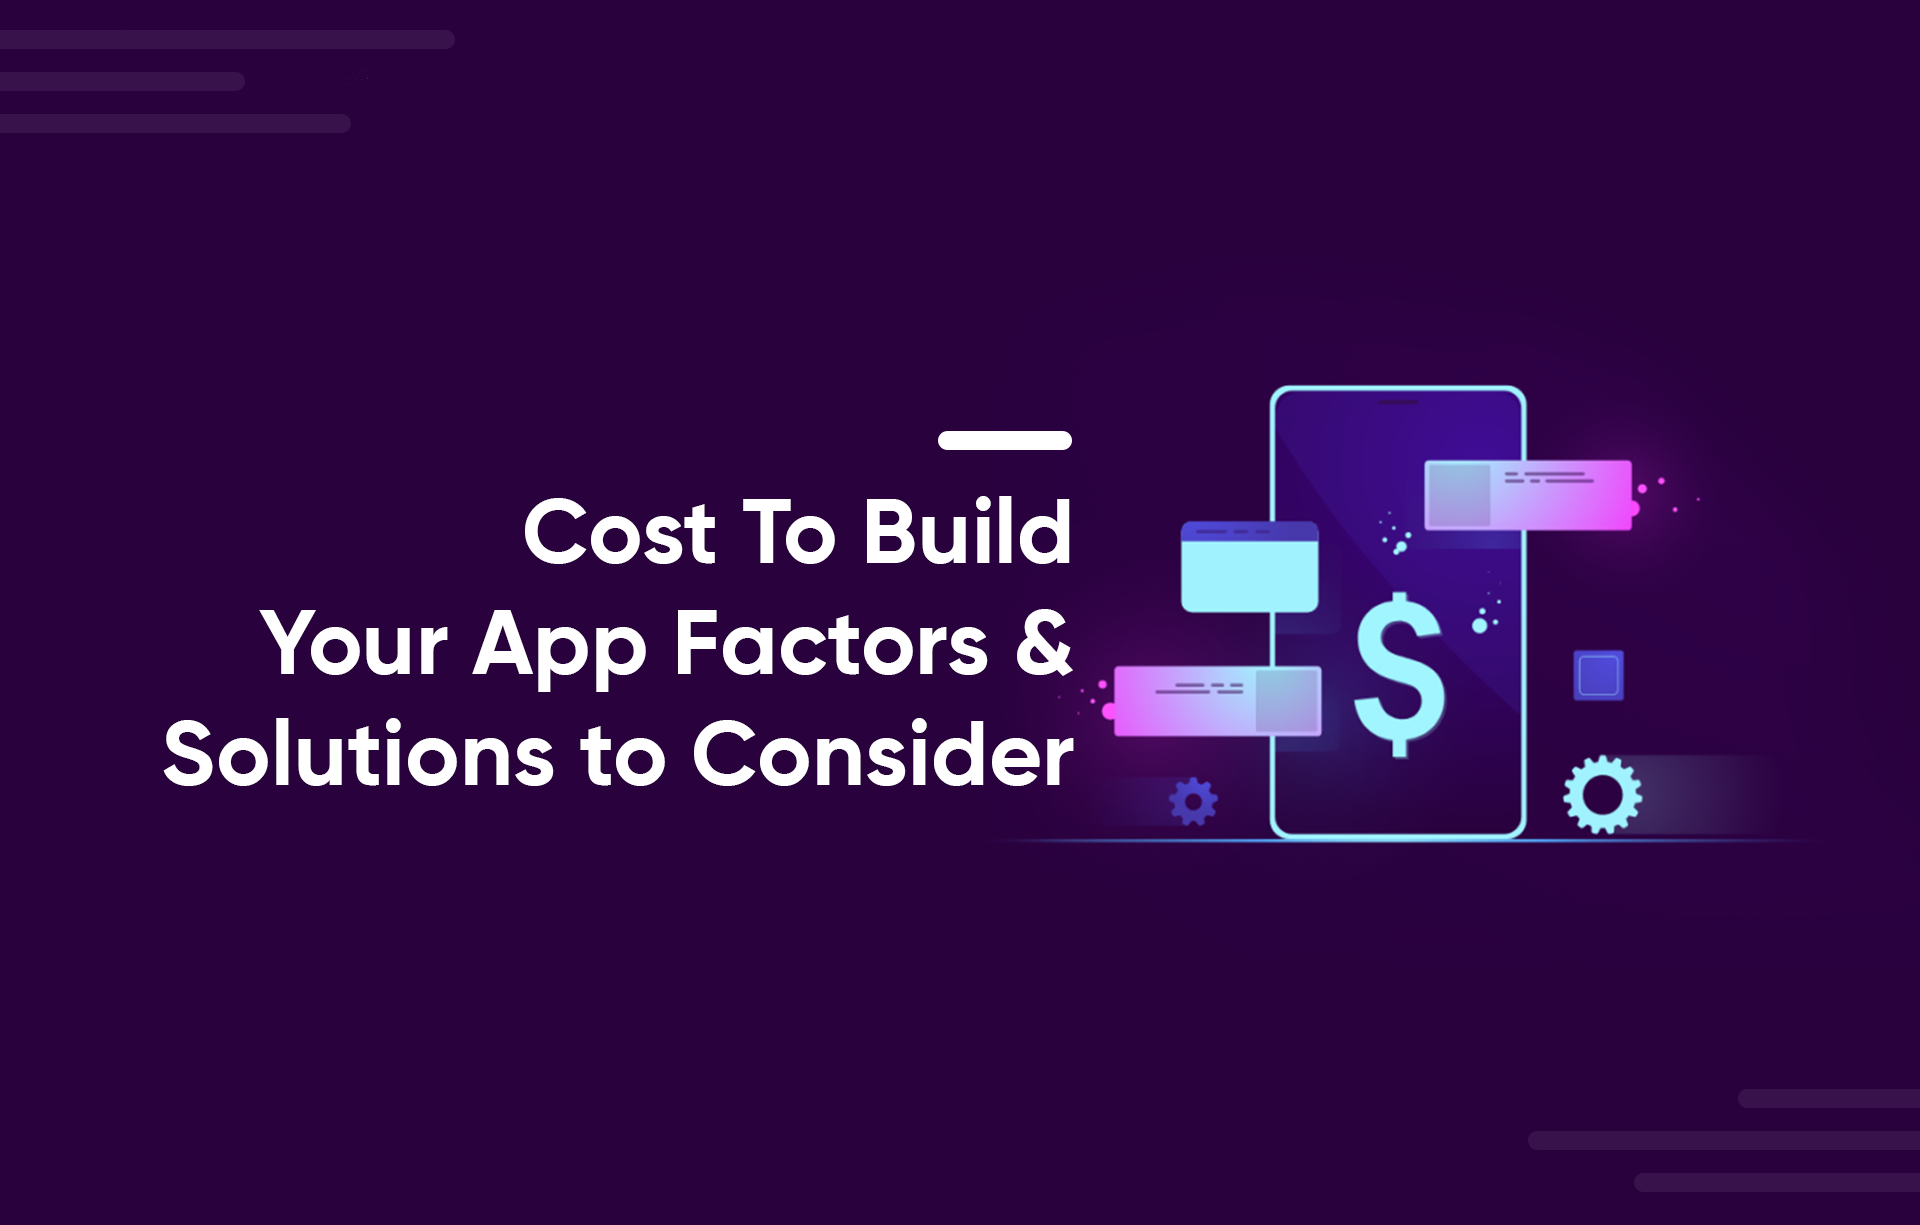 Cost To Build Your App Factors & Solutions to Consider